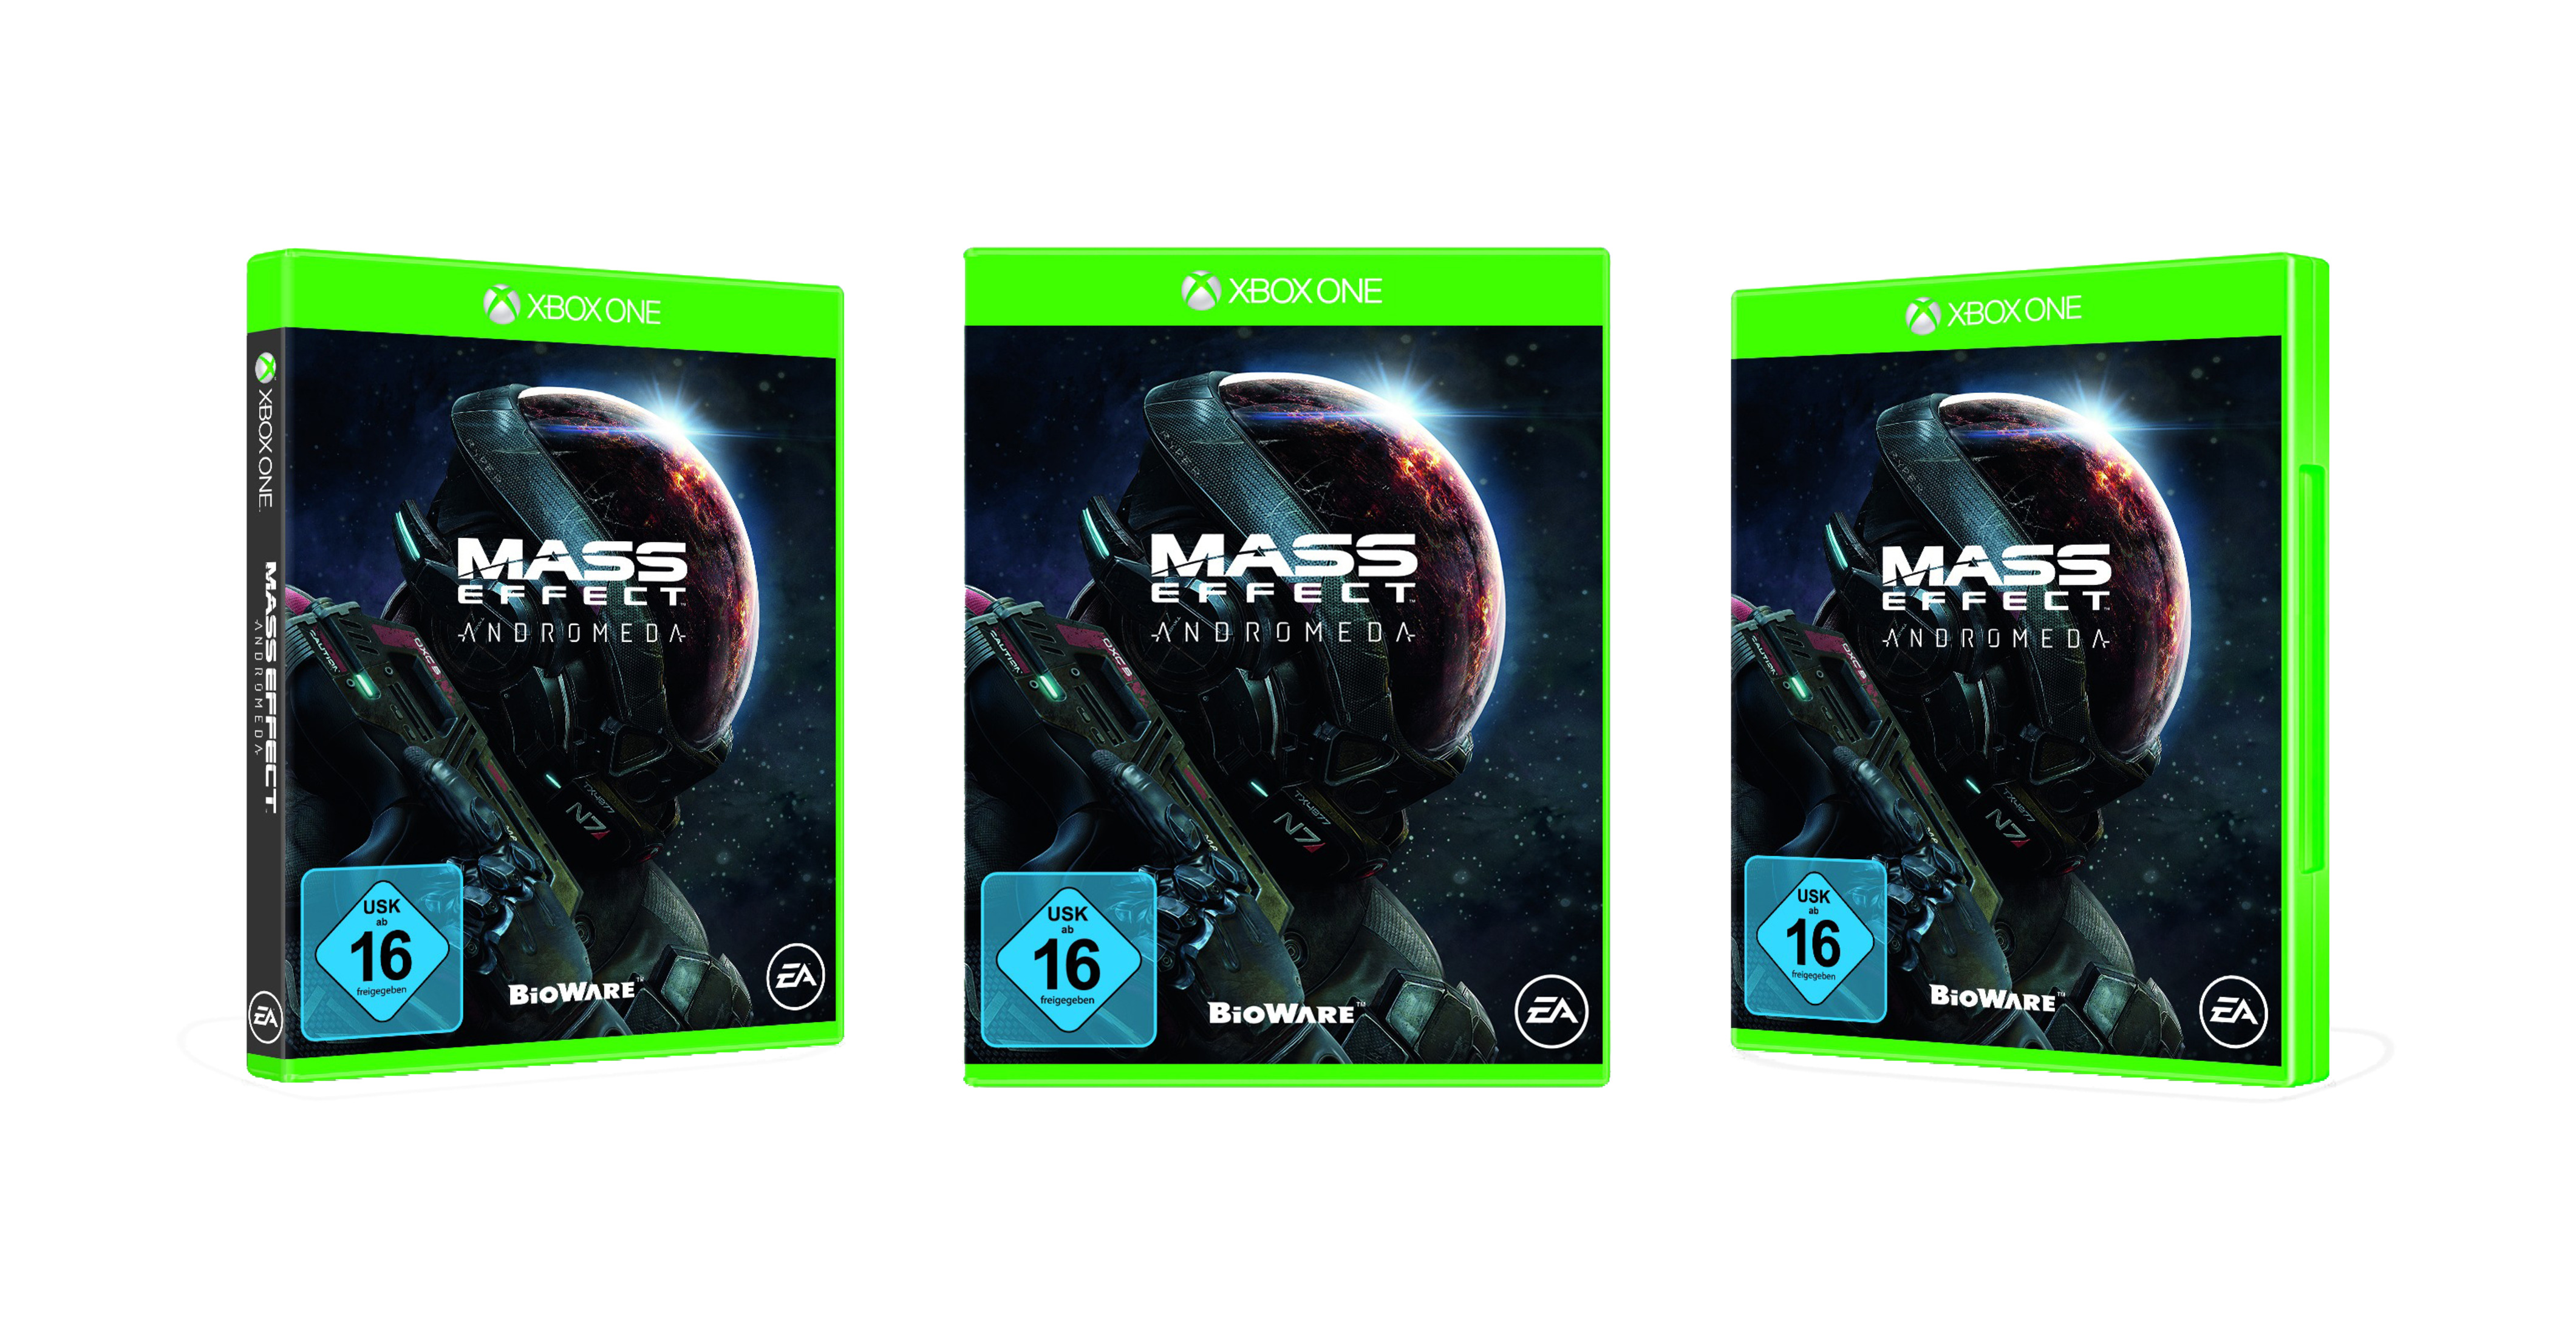 Mass Effect Andromeda One] - [Xbox